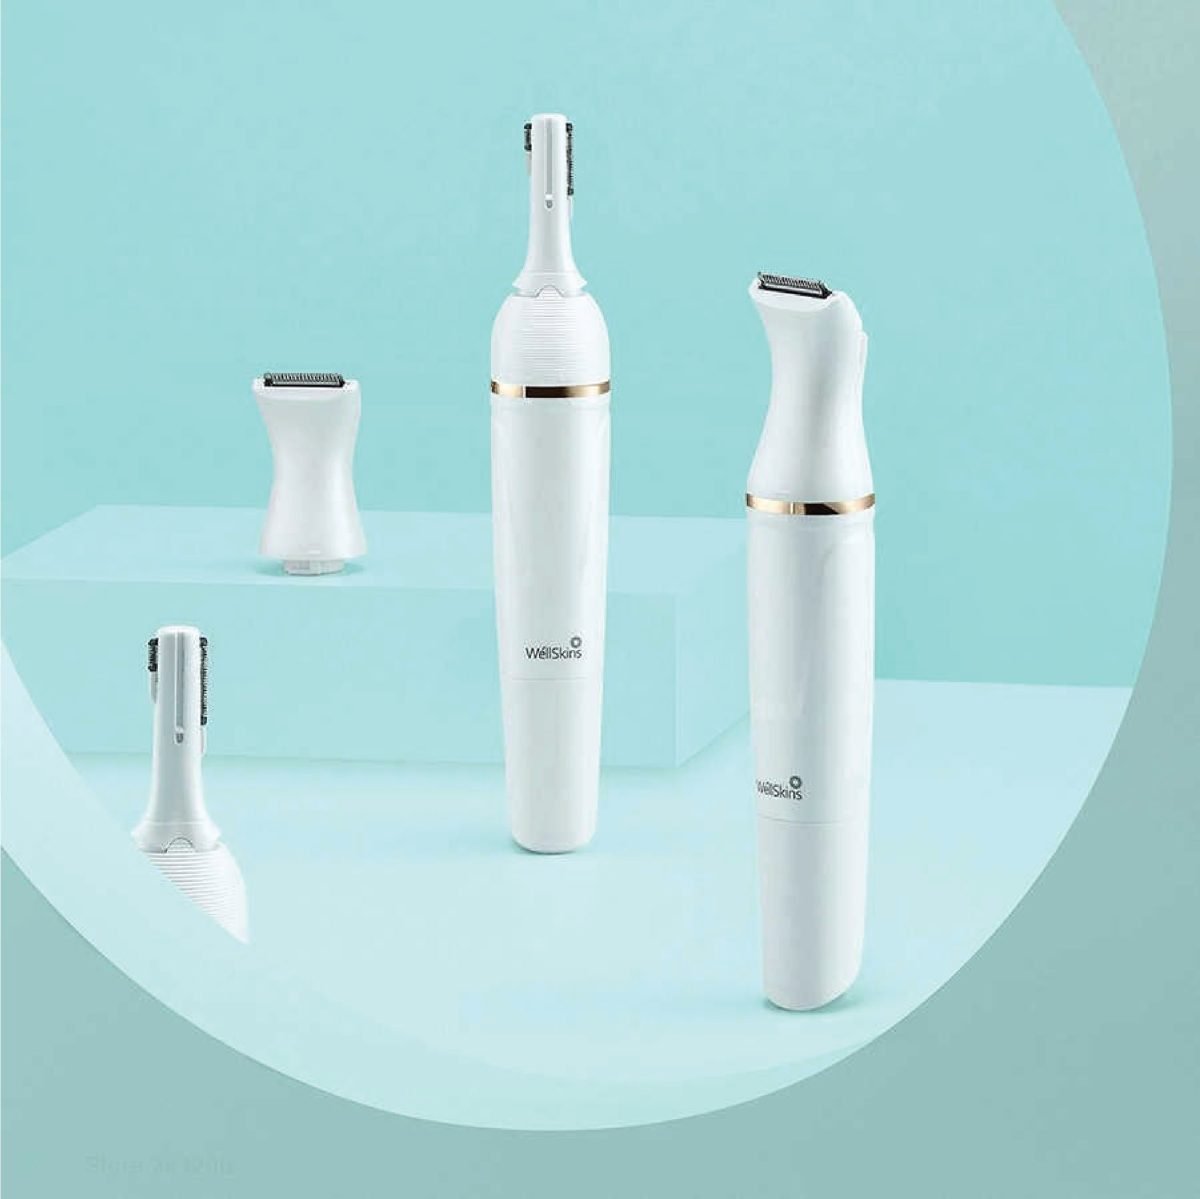 T3 05 Xiaomi Xiao Mi Youpin Wéllskins Electric Trimmer Repairer Shaver Body Hair Removal With Pivoting Head 30° Adjustable Cutter Head Hair Remover For Women Painless Lady Shaver 6-In-1 Https://Www.youtube.com/Watch?V=N-Wn12U3Uj4 Xiaomi Wellskins Wx-Tm01 Personal Beauty Trimmer